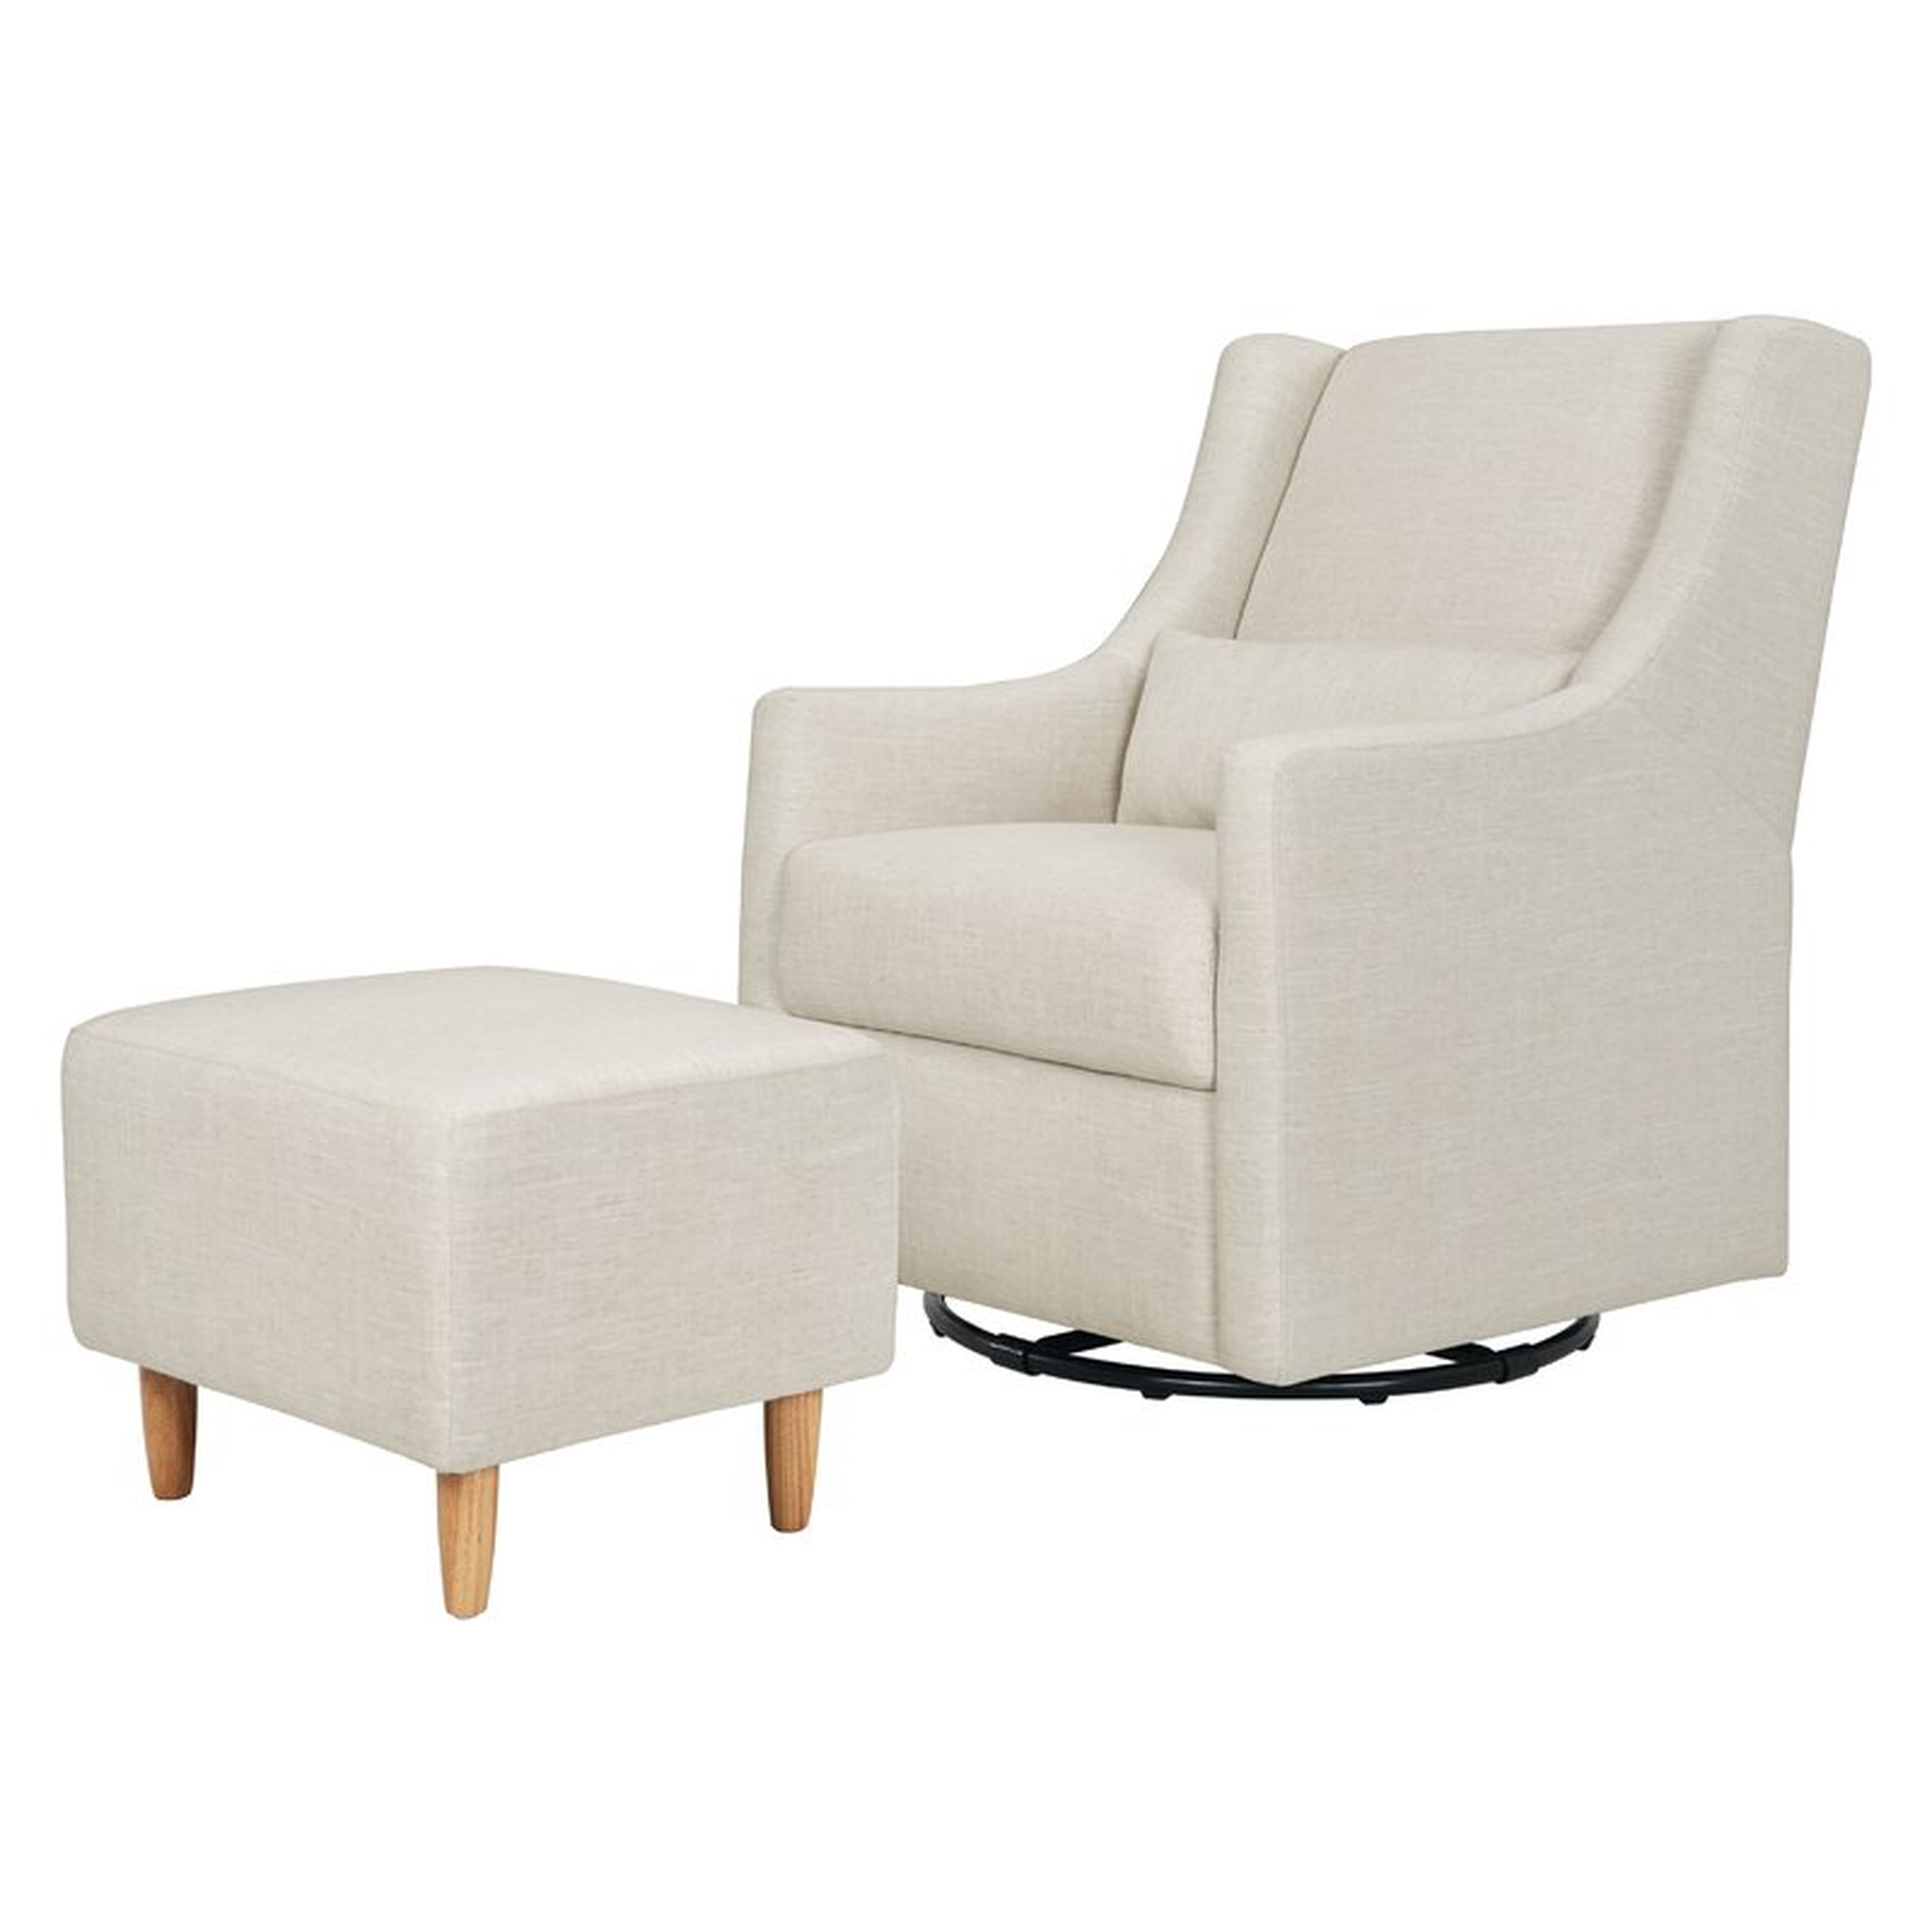 Toco Swivel Glider and Ottoman by babyletto - Wayfair